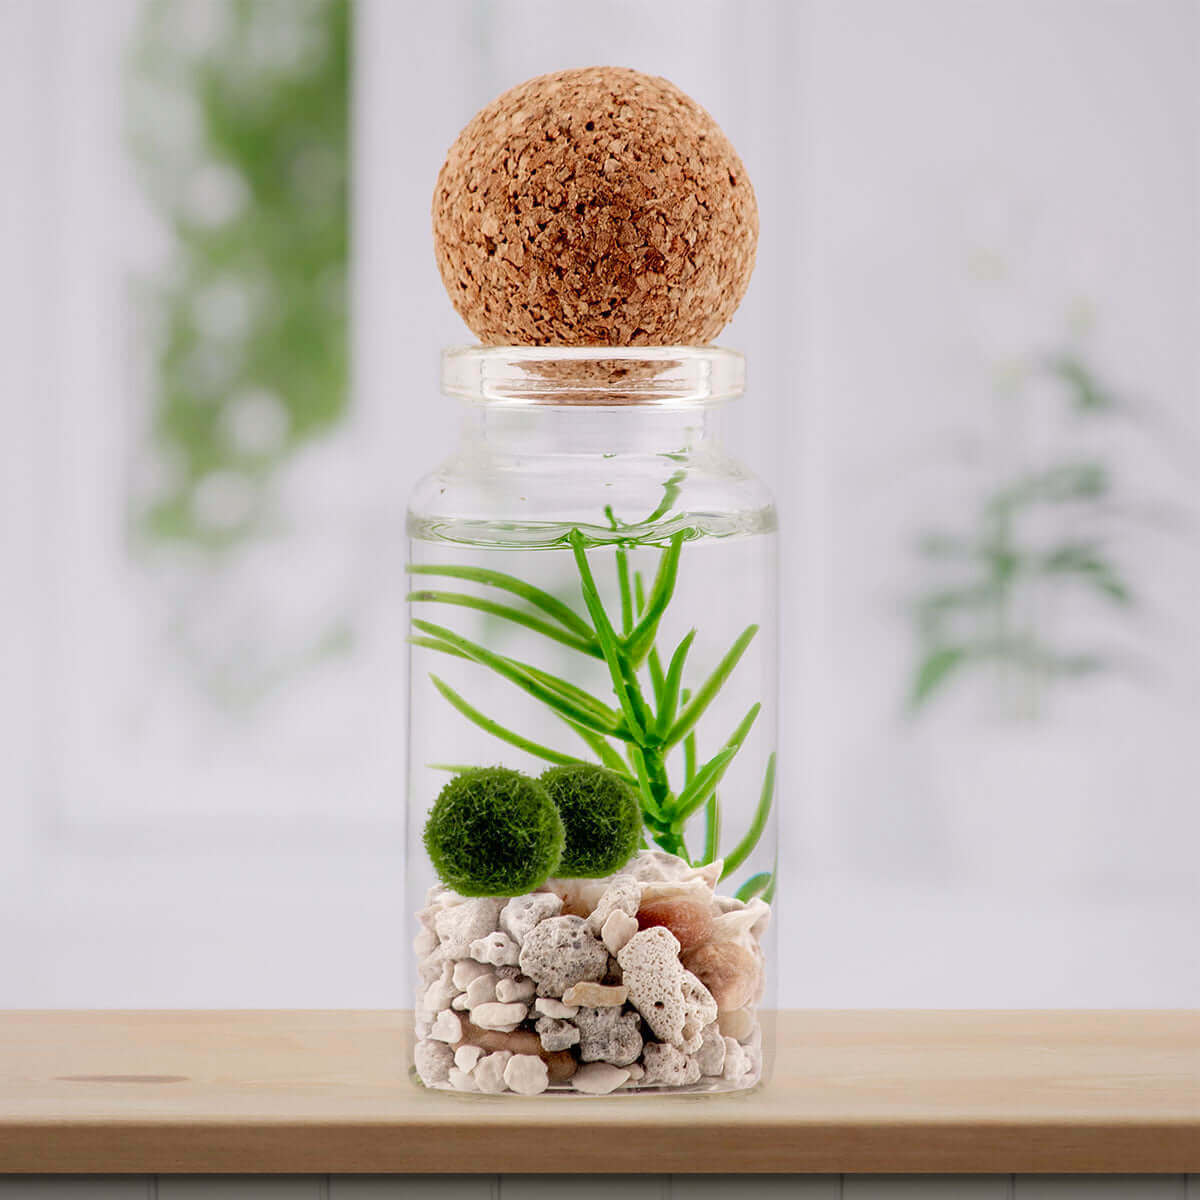 Cork sphere crowning a moss ball terrarium, evoking a natural and sustainable vibe.